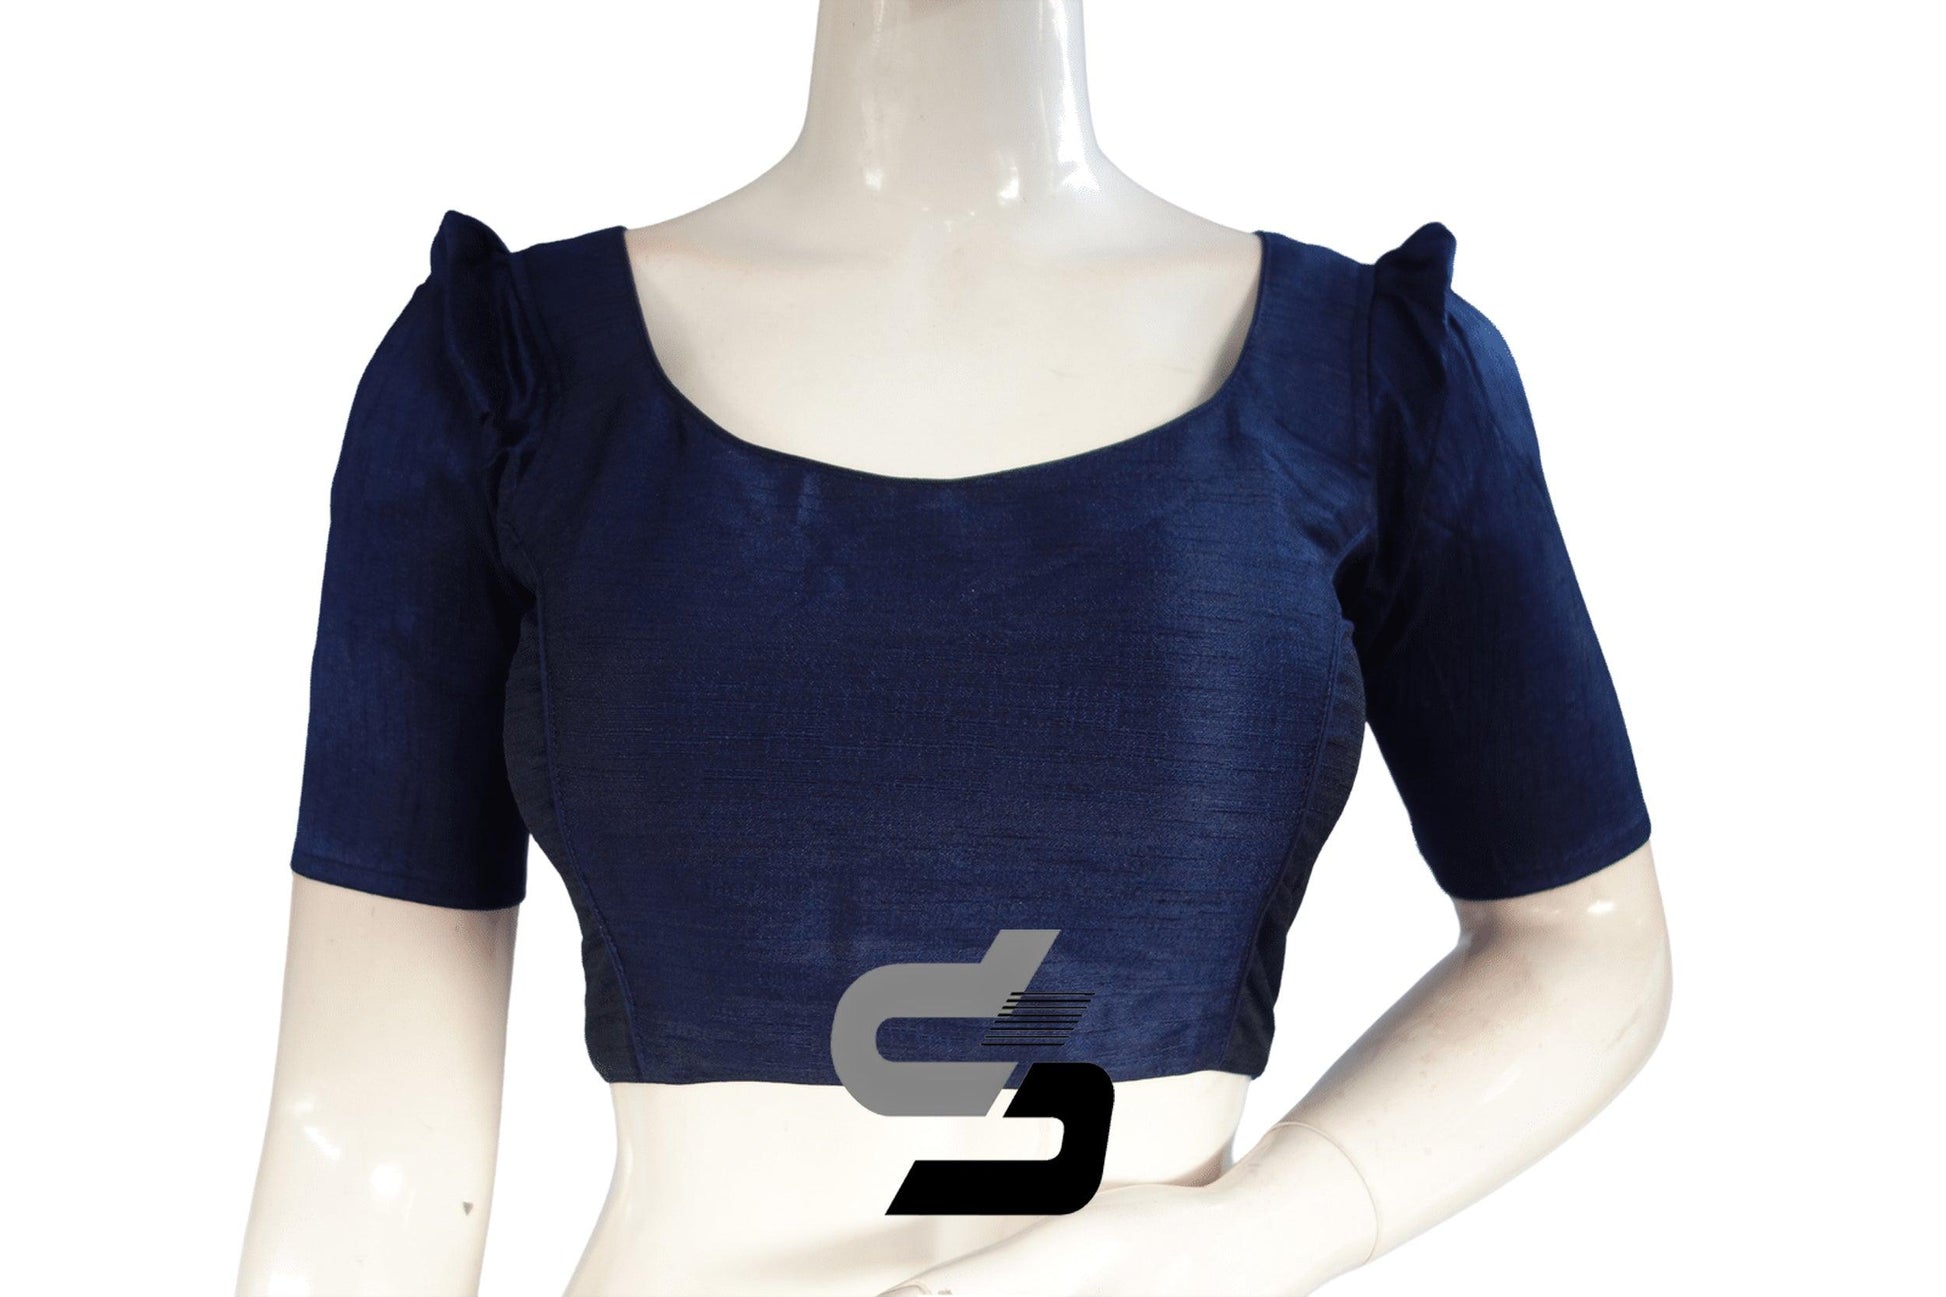 Navy Blue Color Plain Semi Silk Designer Readymade Saree Blouse with Retro Puff Sleeves - D3blouses